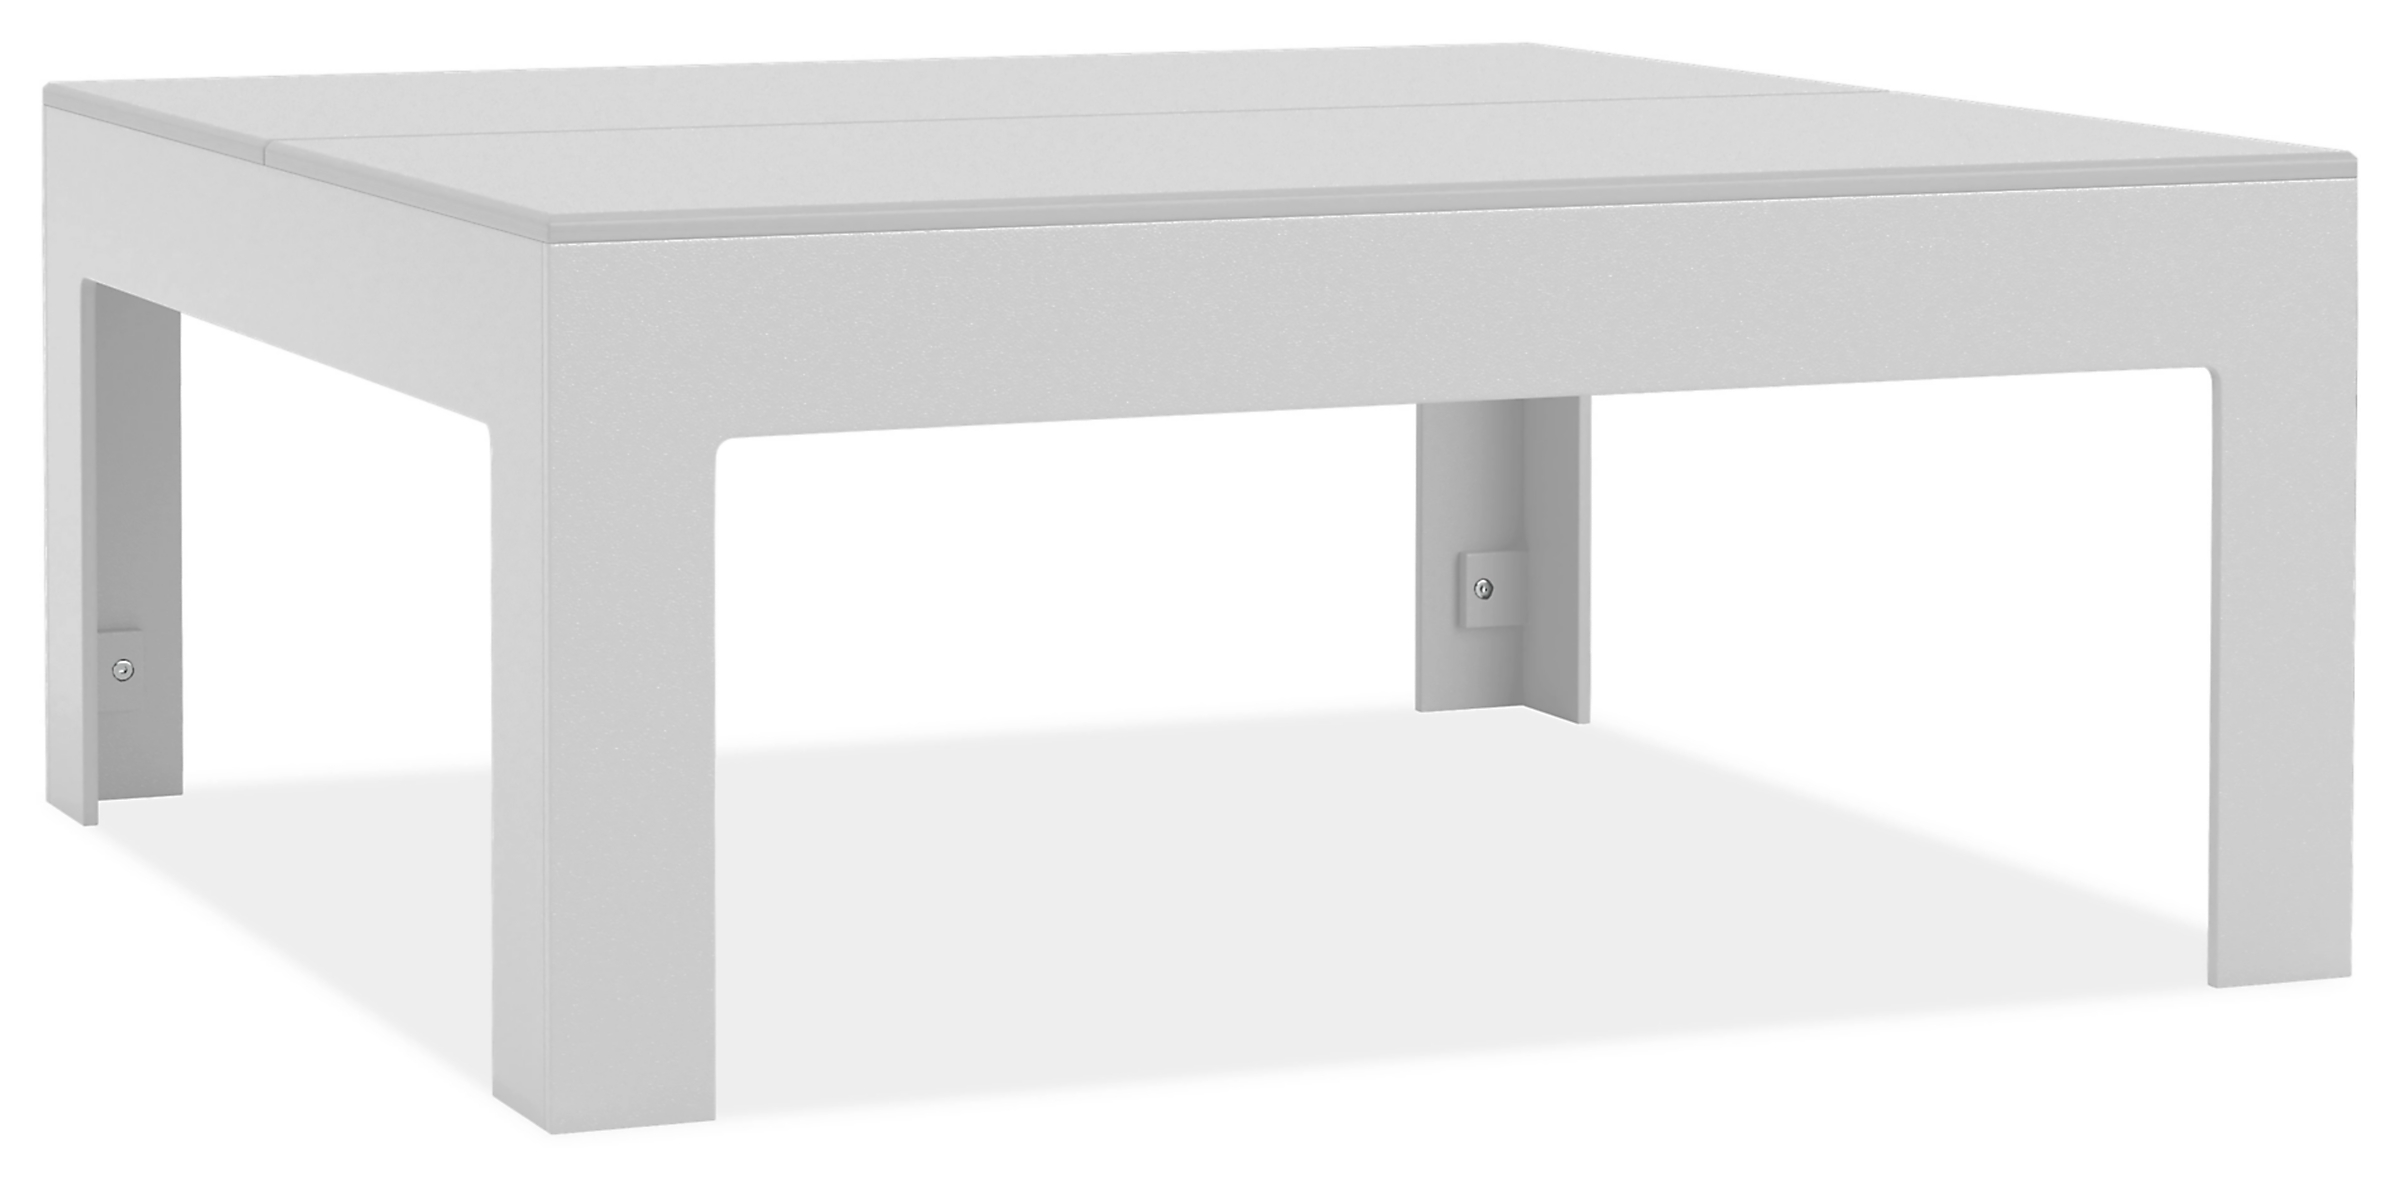 Henry 36w 36d 16h Coffee Table in White